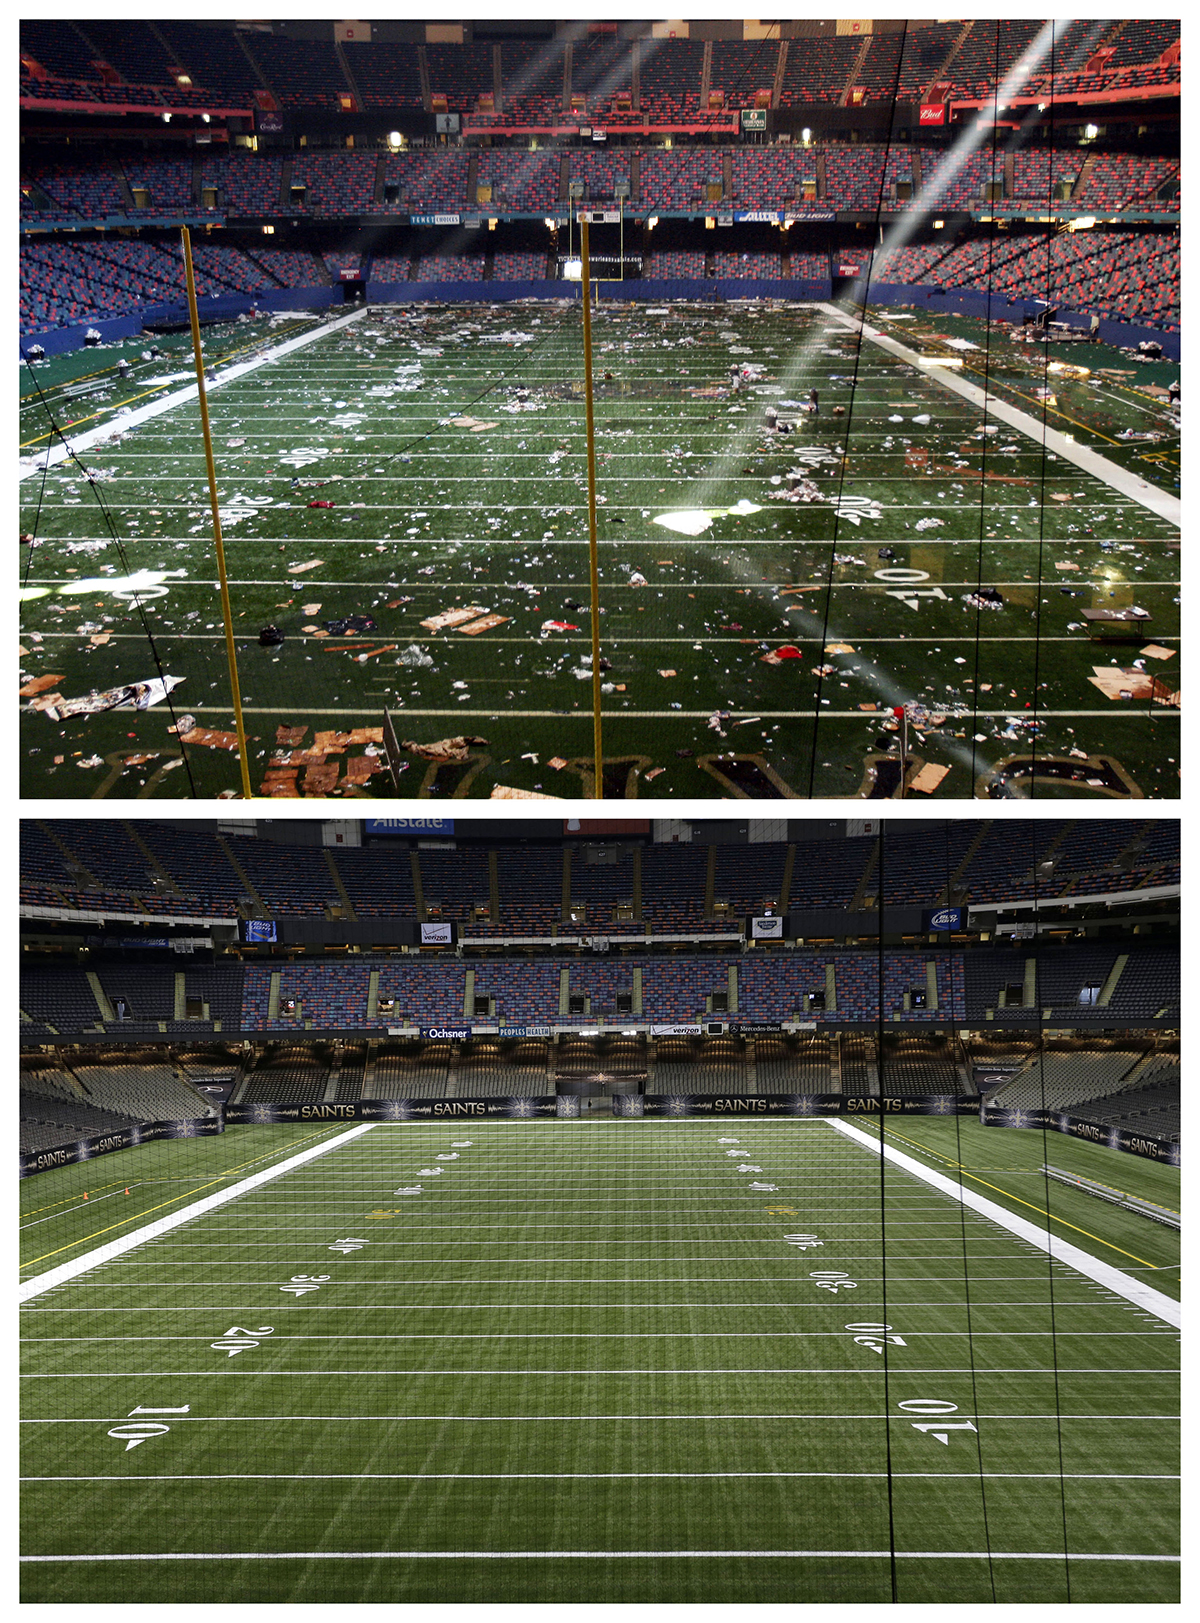 This combination of Sept. 2, 2005, and Aug. 14, 2015, photos shows the playing field of the Louisiana Superdome in New Orleans littered with debris after serving as a shelter for victims from Hurricane Katrina, and a decade later, the renamed Mercedes-Benz Superdome. (Bill Haber, Gerald Herbert / Associated Press)